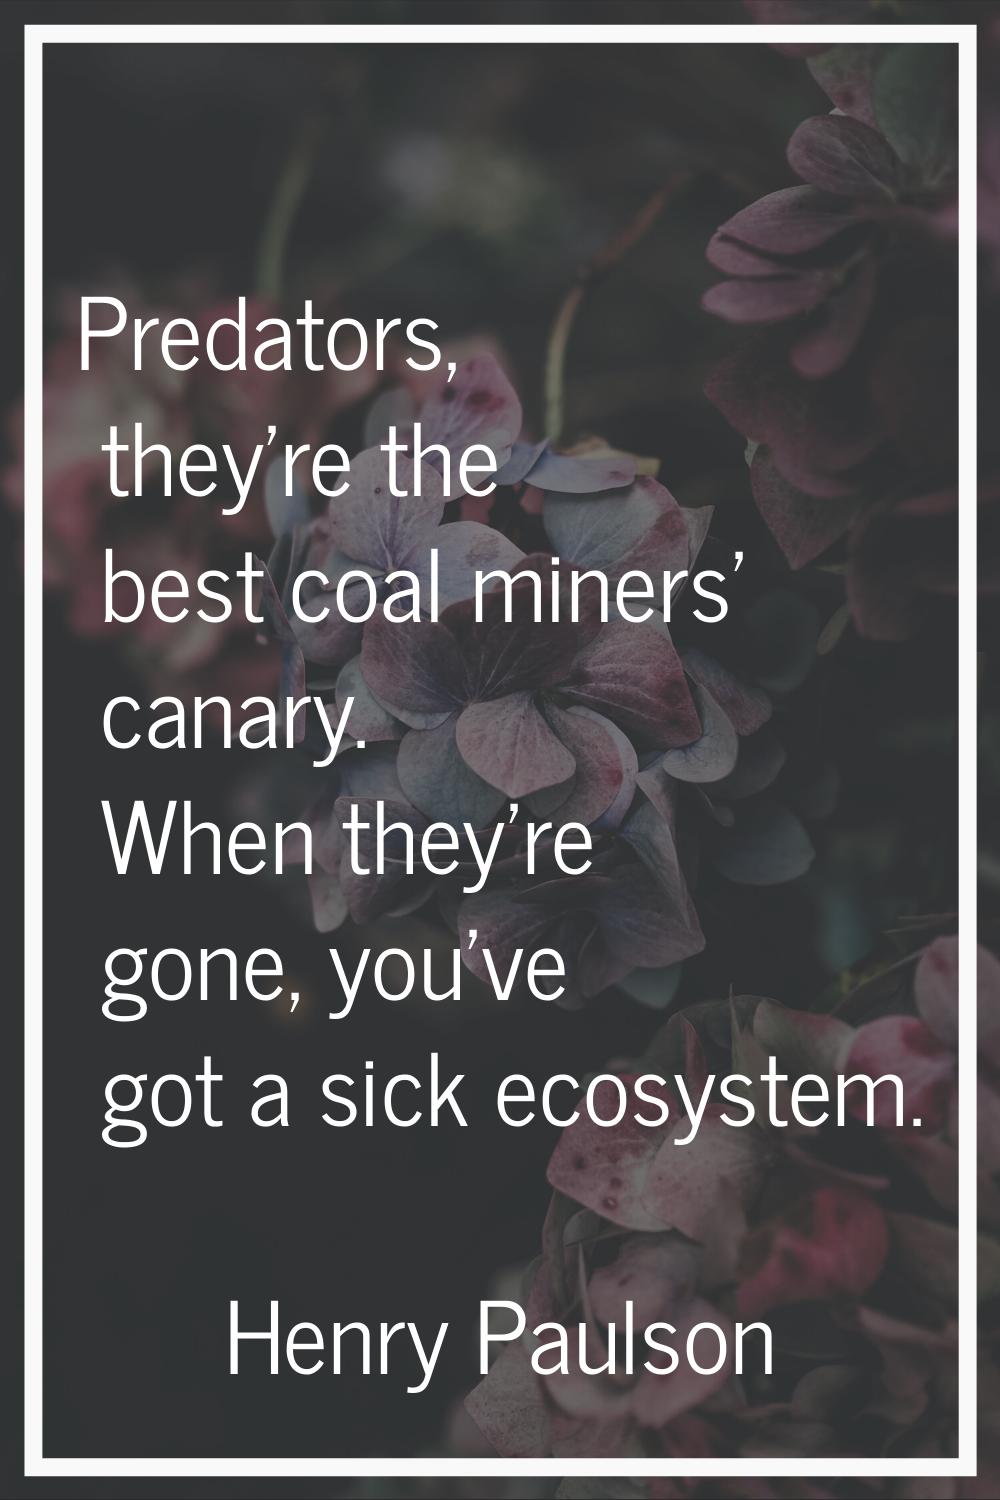 Predators, they're the best coal miners' canary. When they're gone, you've got a sick ecosystem.